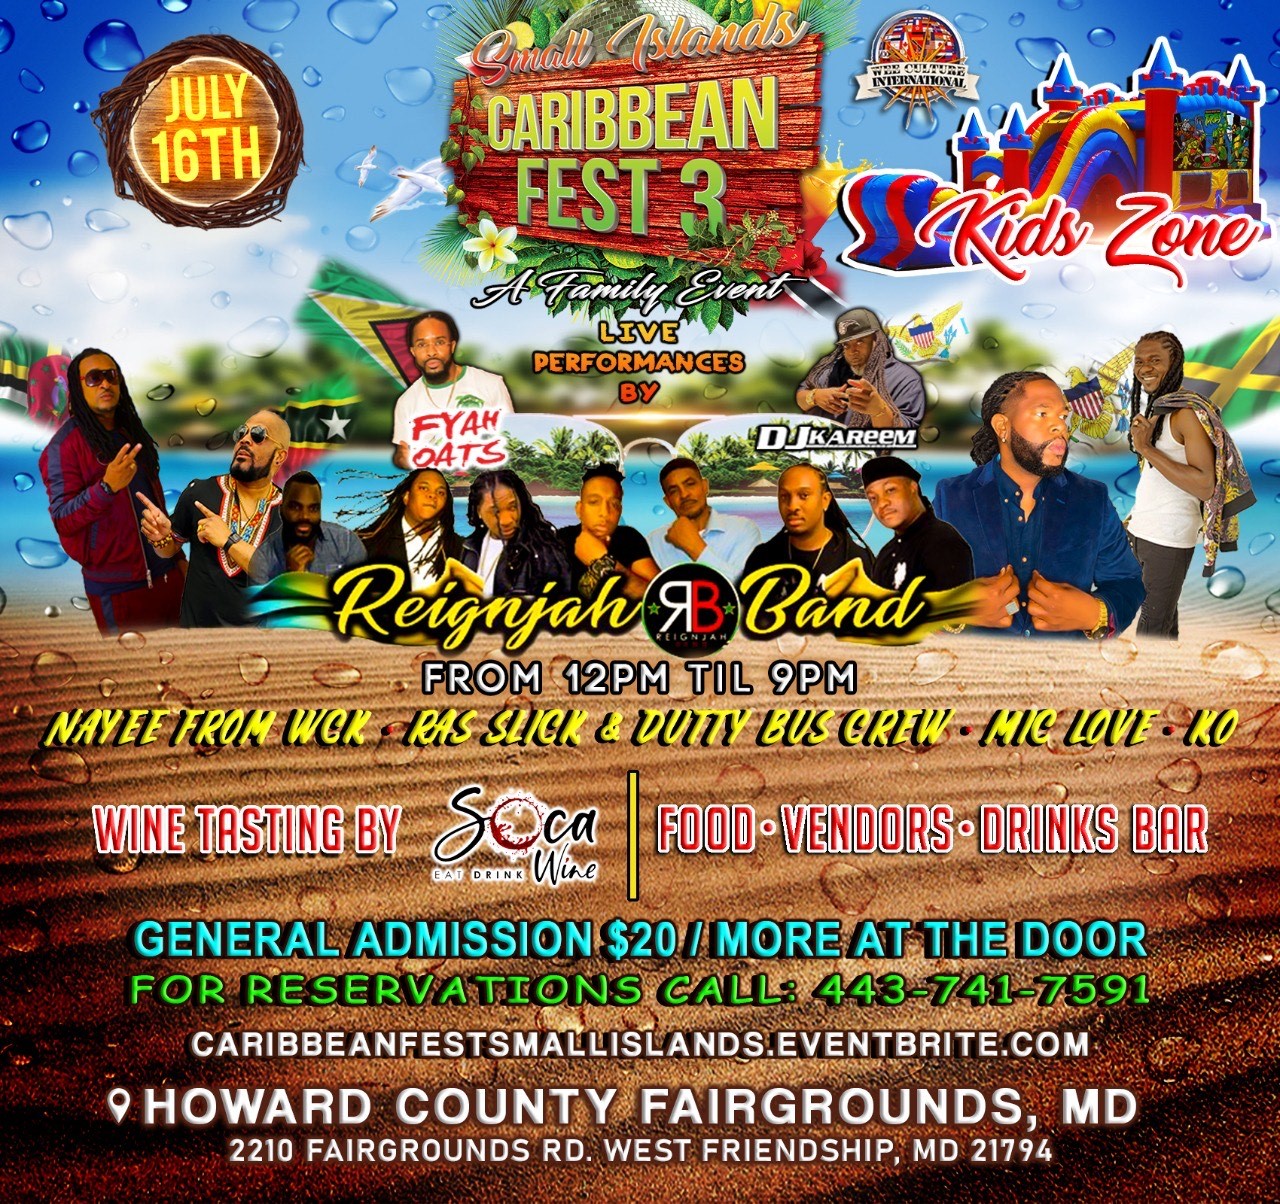 Small Islands Caribbean Fest  on Jul 16, 12:00@Howard County Fairgrounds - Buy tickets and Get information on www.fetefinders.com tickets.fetefinders.com